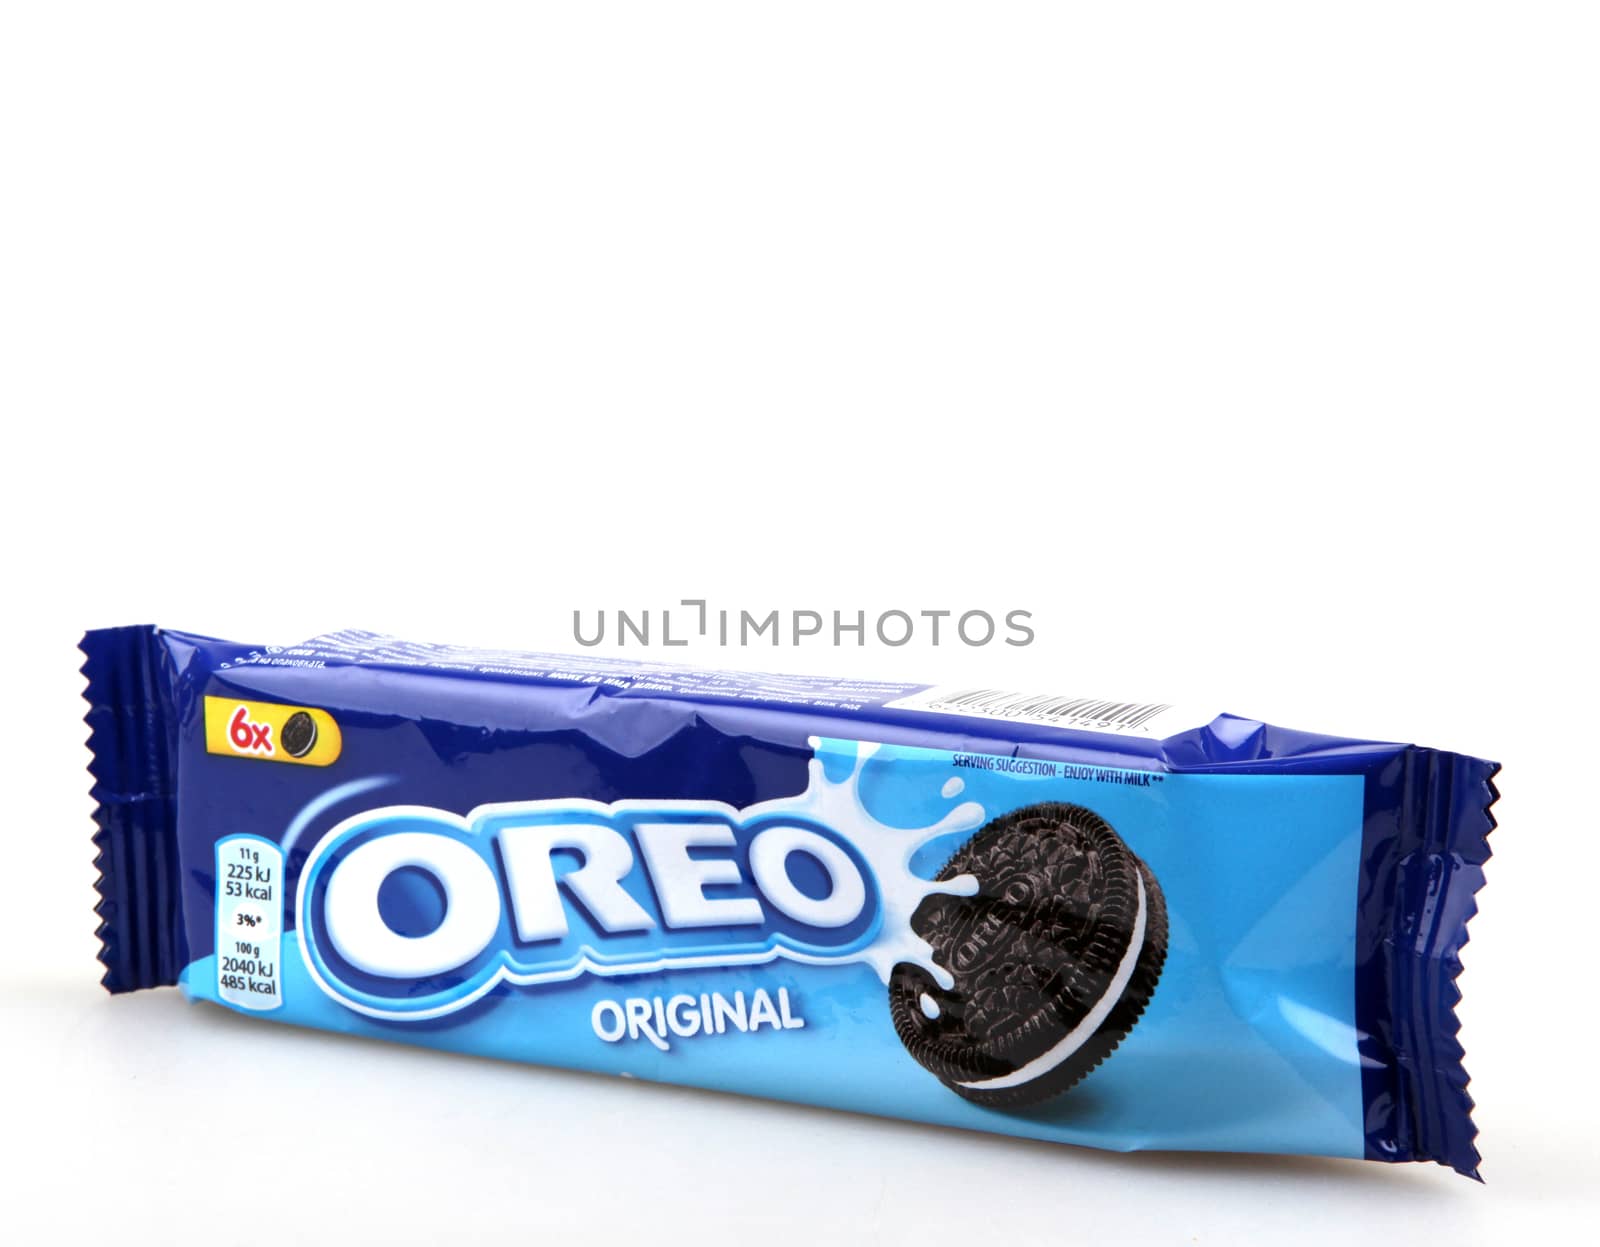 AYTOS, BULGARIA - DECEMBER 11, 2015: Oreo isolated on white background. Oreo is a sandwich cookie consisting of two chocolate disks with a sweet cream filling in between.